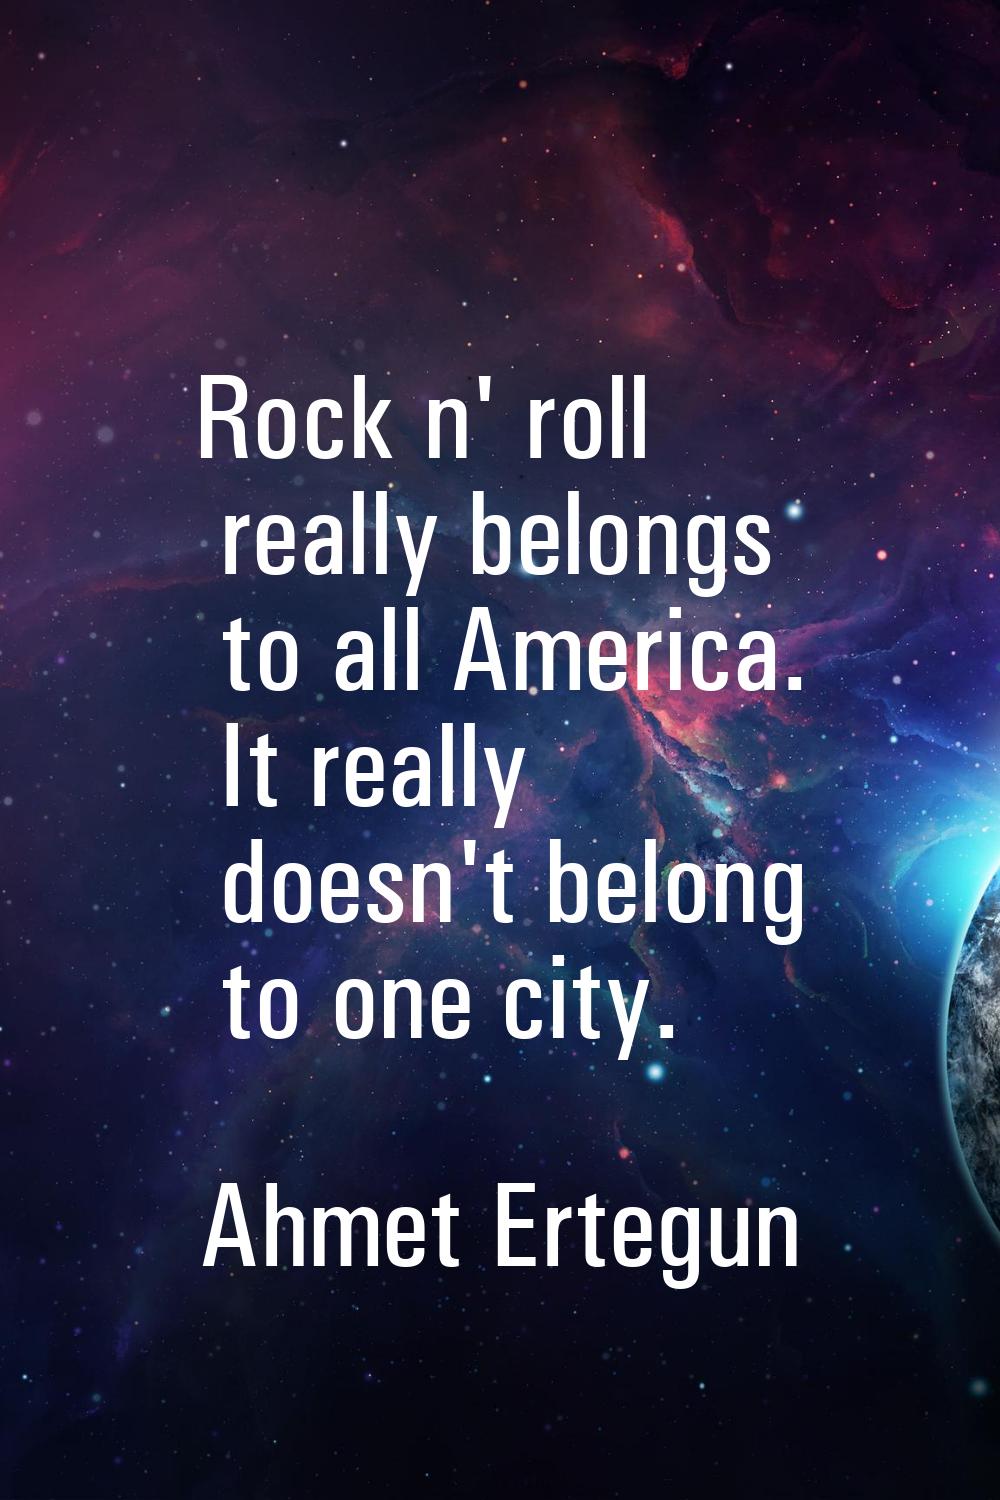 Rock n' roll really belongs to all America. It really doesn't belong to one city.